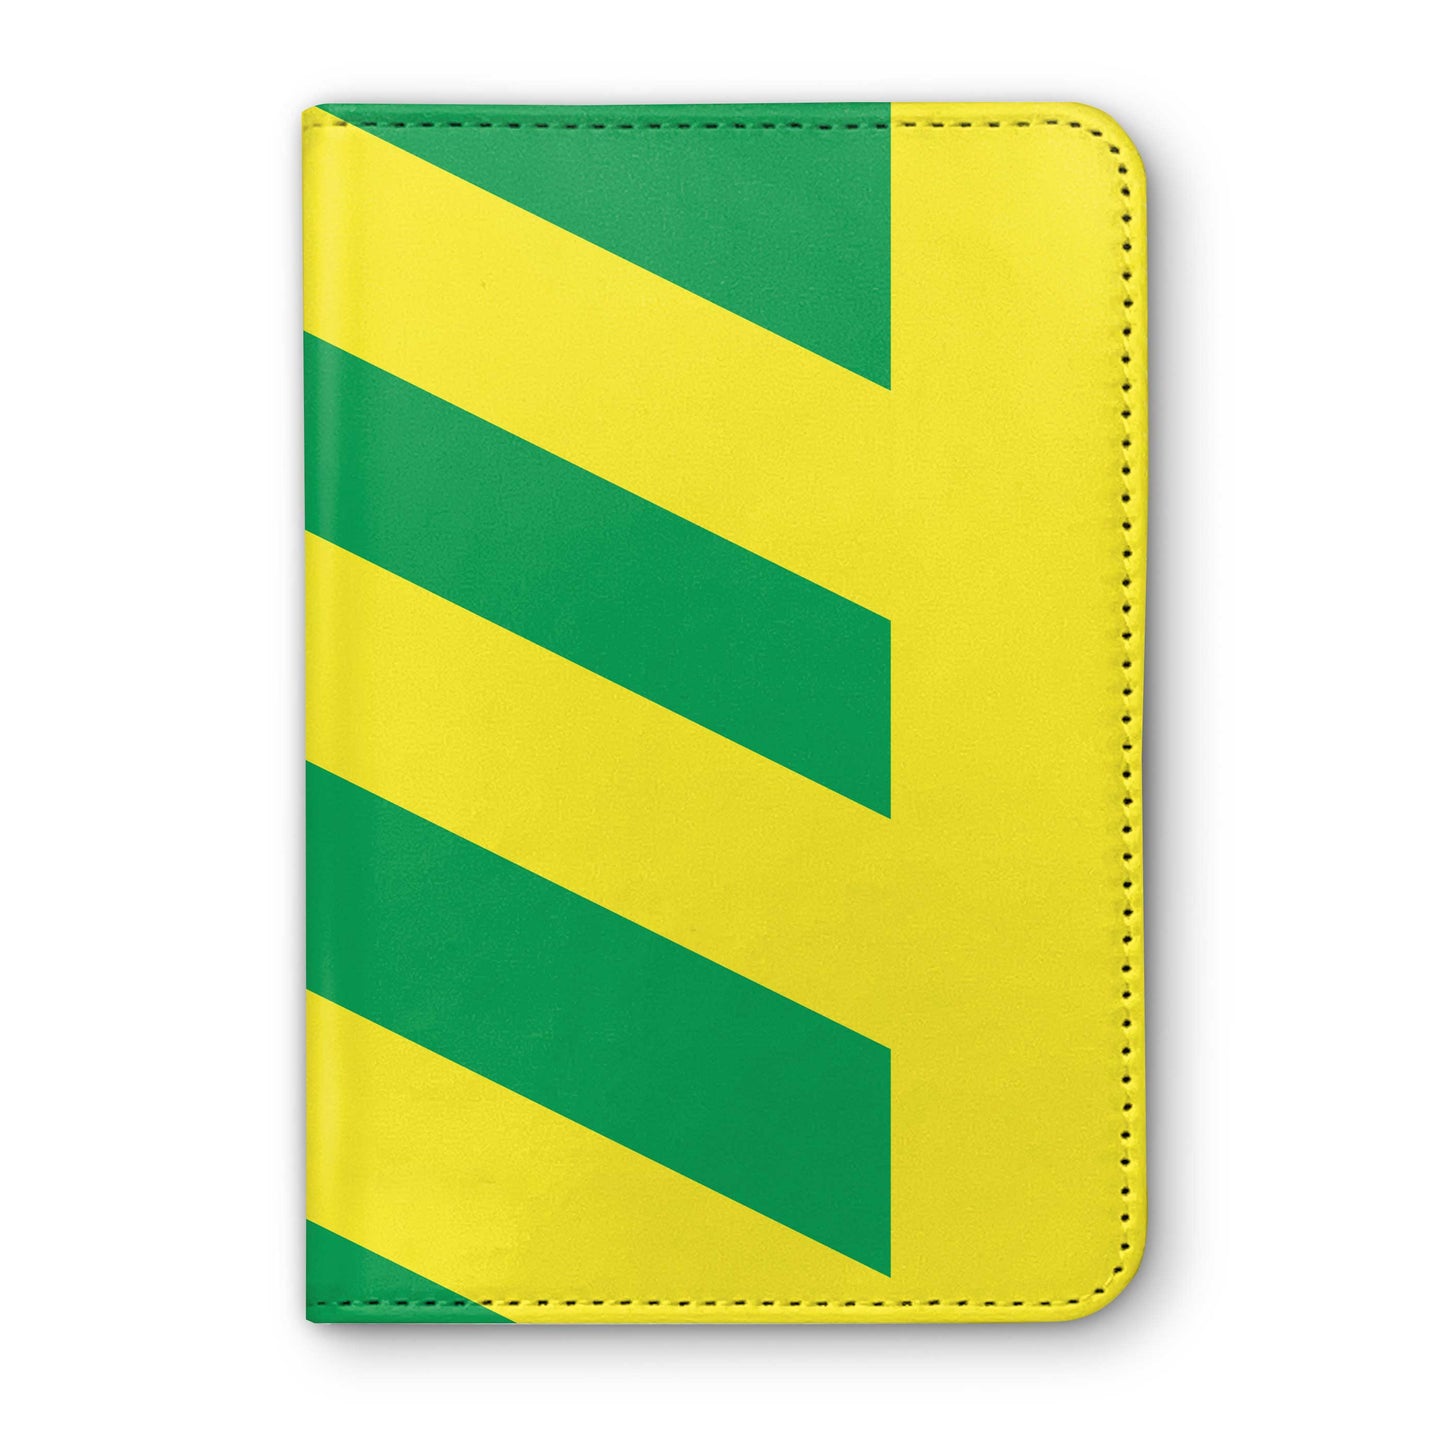 Watch This Space Syndicate Horse Racing Passport Holder - Hacked Up Horse Racing Gifts